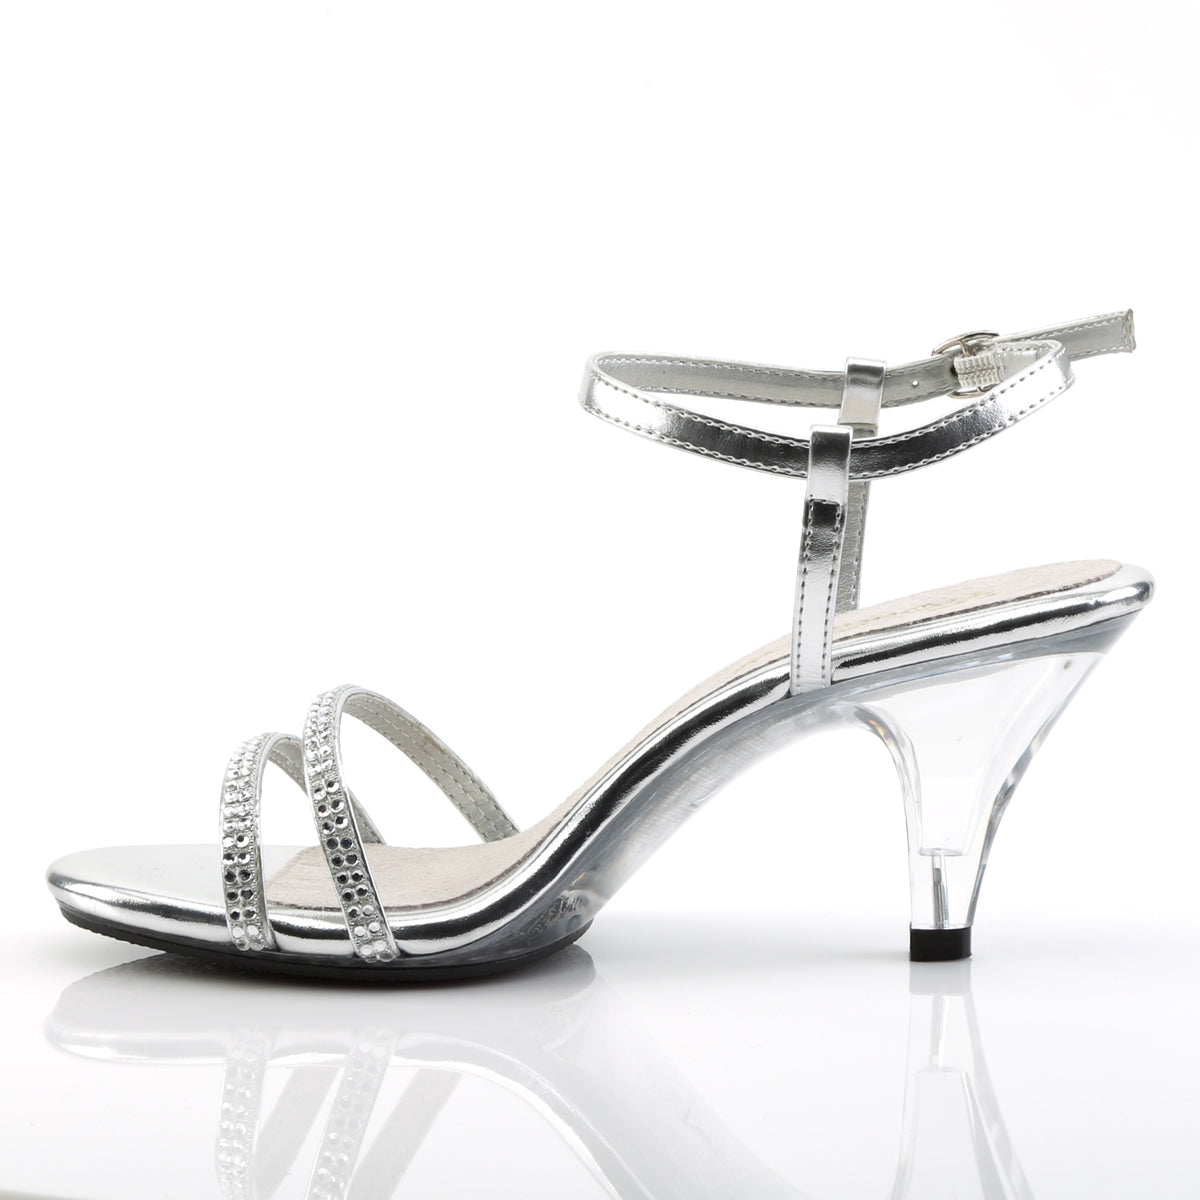 BELLE-316 Fabulicious 3 Inch Heel Silver Sexy Shoes-Fabulicious- Sexy Shoes Pole Dance Heels